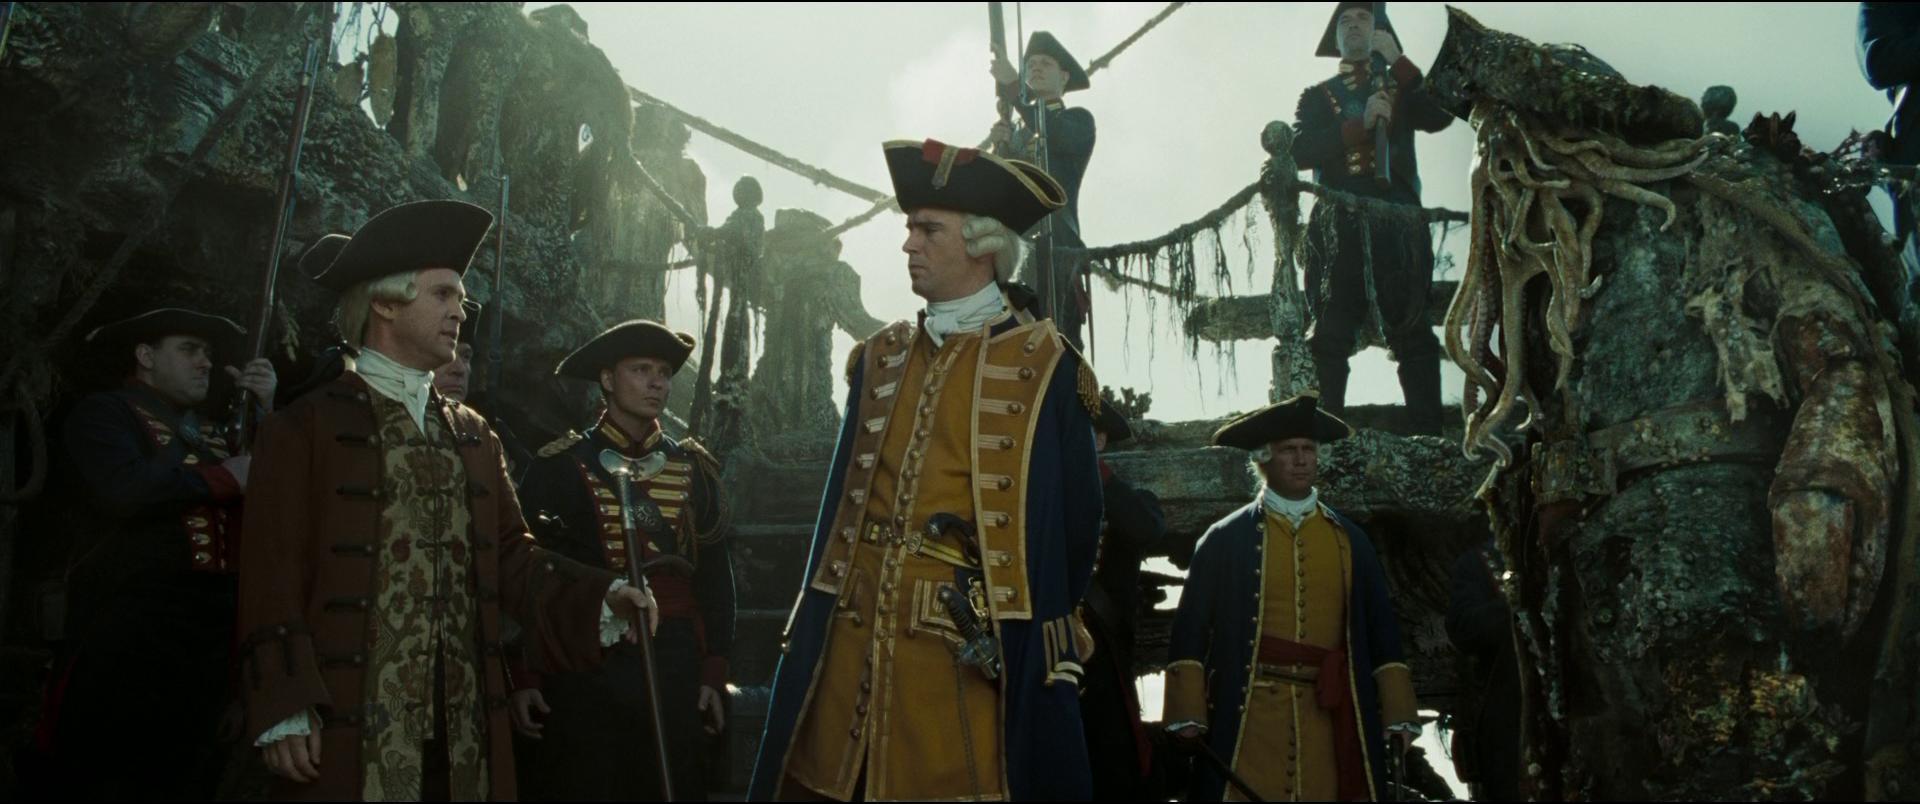 Image gallery for Pirates of the Caribbean: At World's End - FilmAffinity